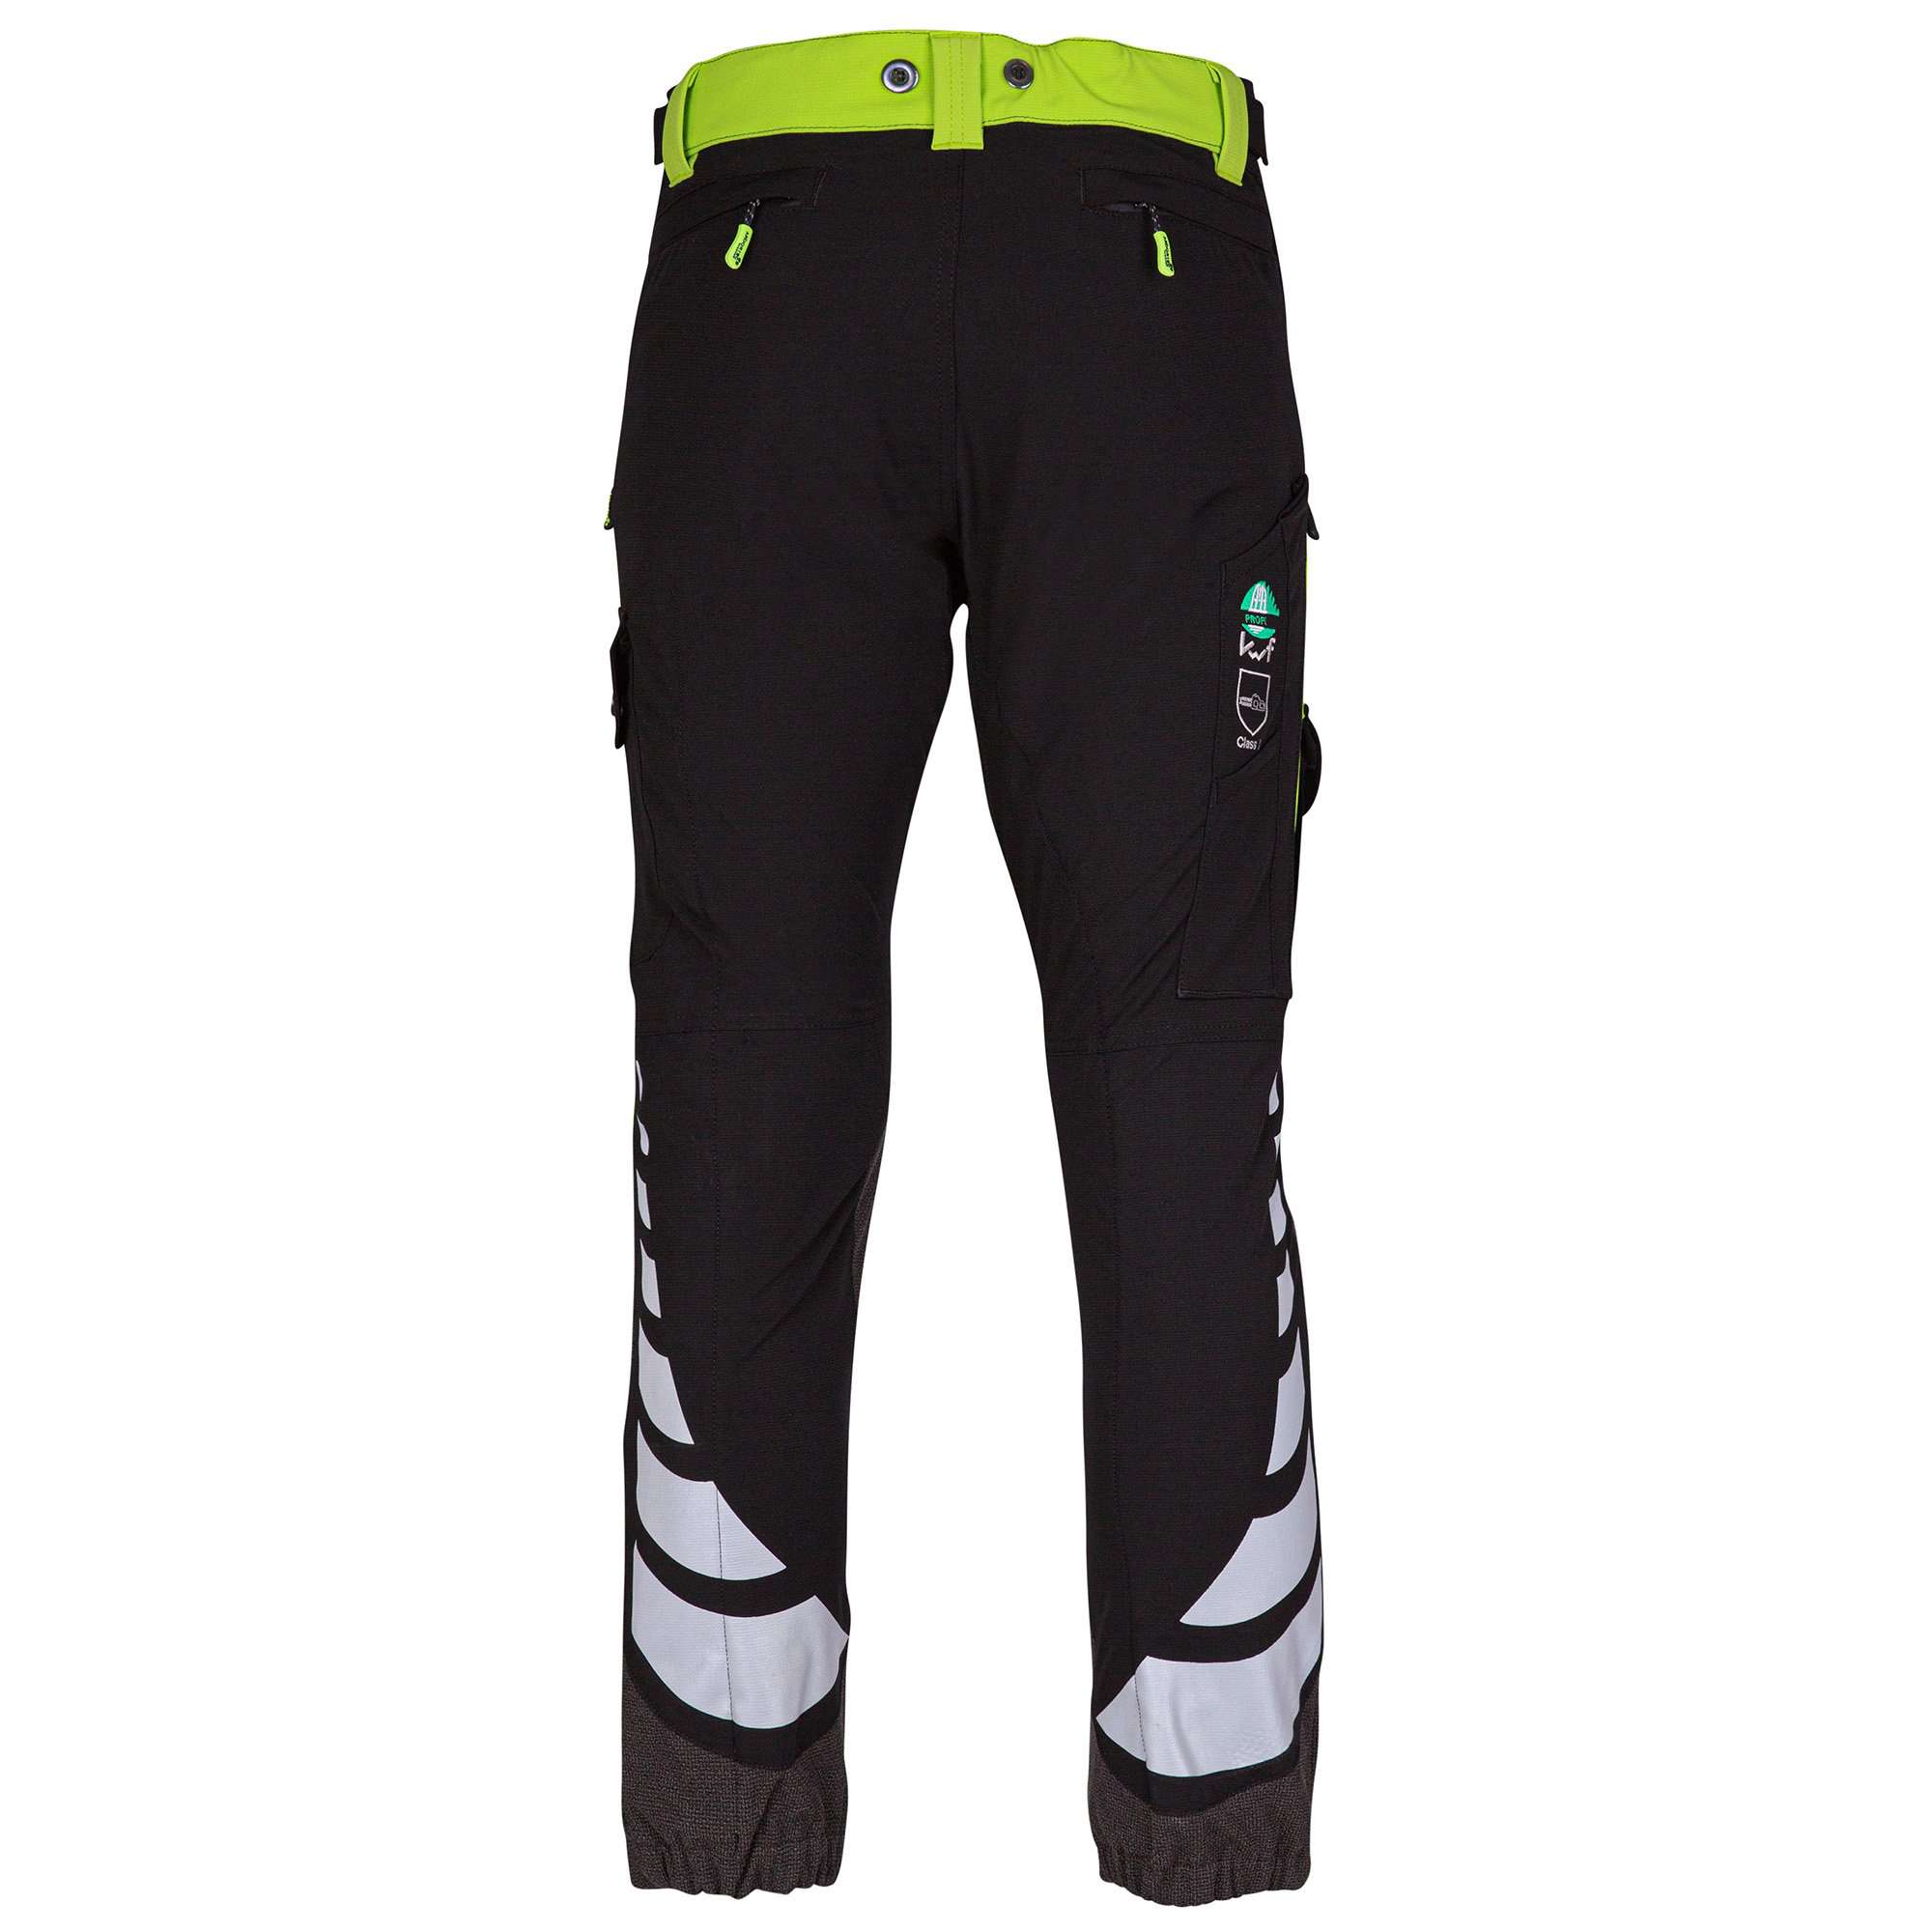 AT4050 Breatheflex Ladies Type C Class 1 Chainsaw Trousers - Lime - Arbortec Forestwear